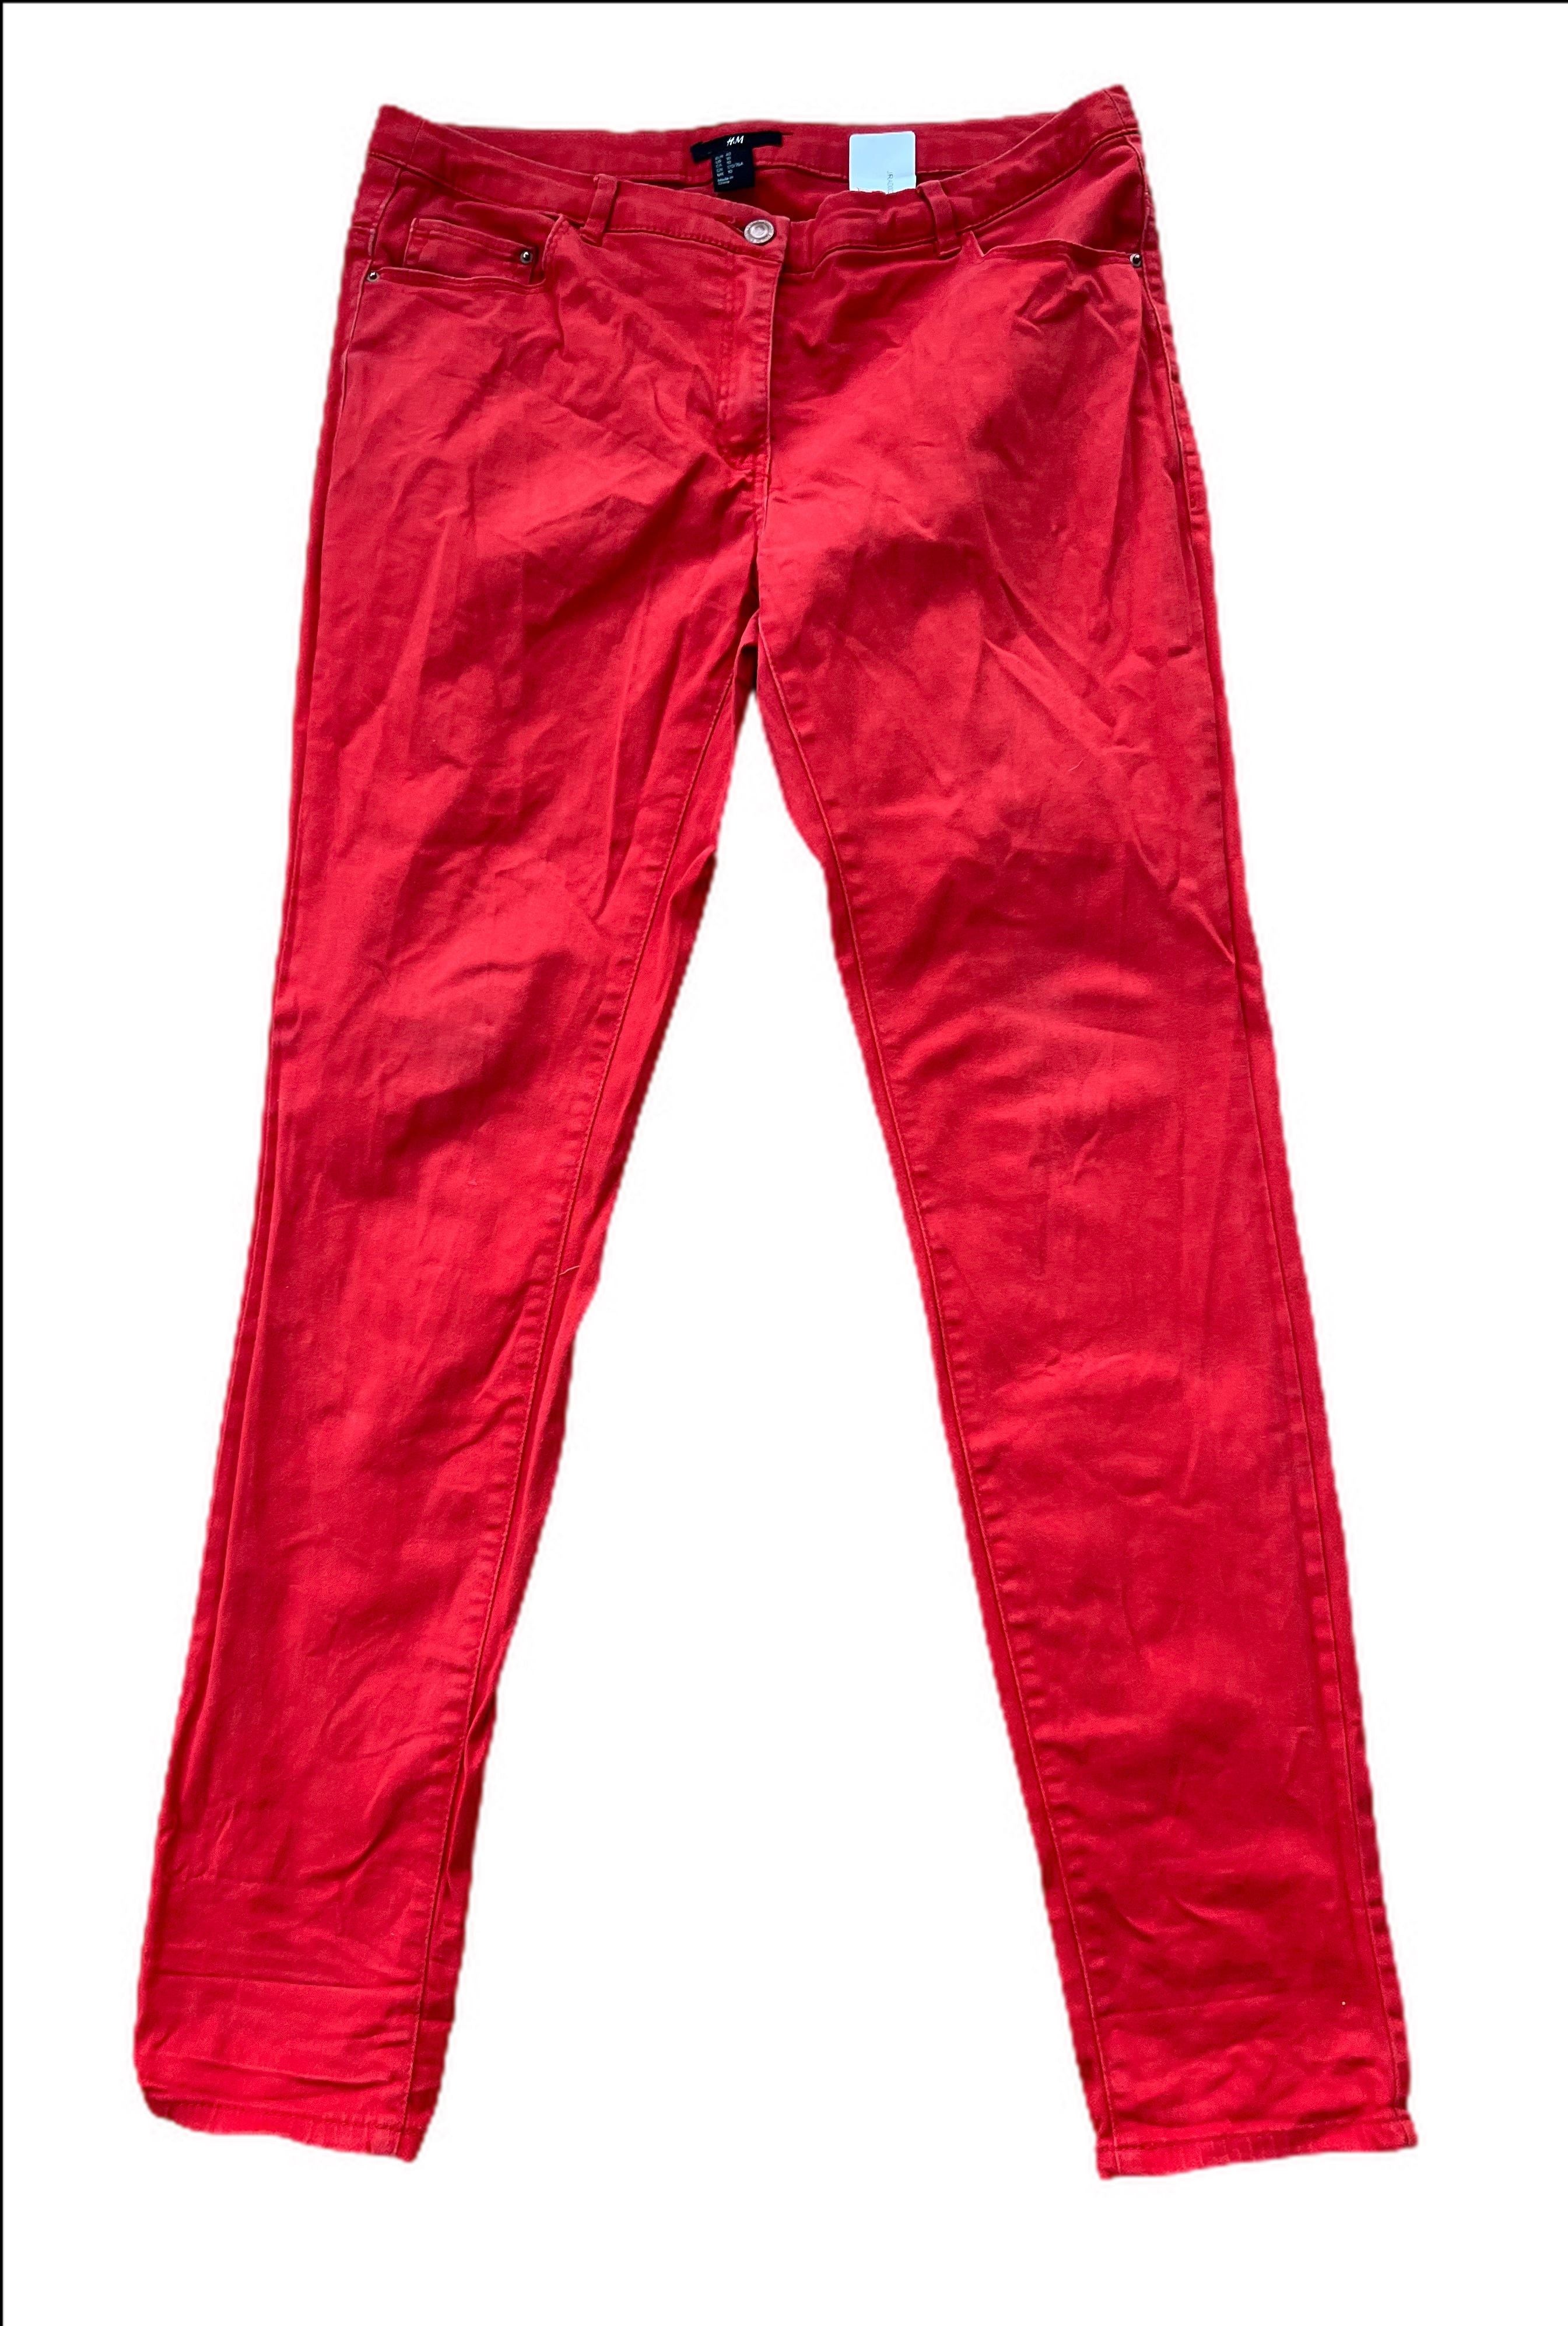 H&M Skinny tomato red jeans